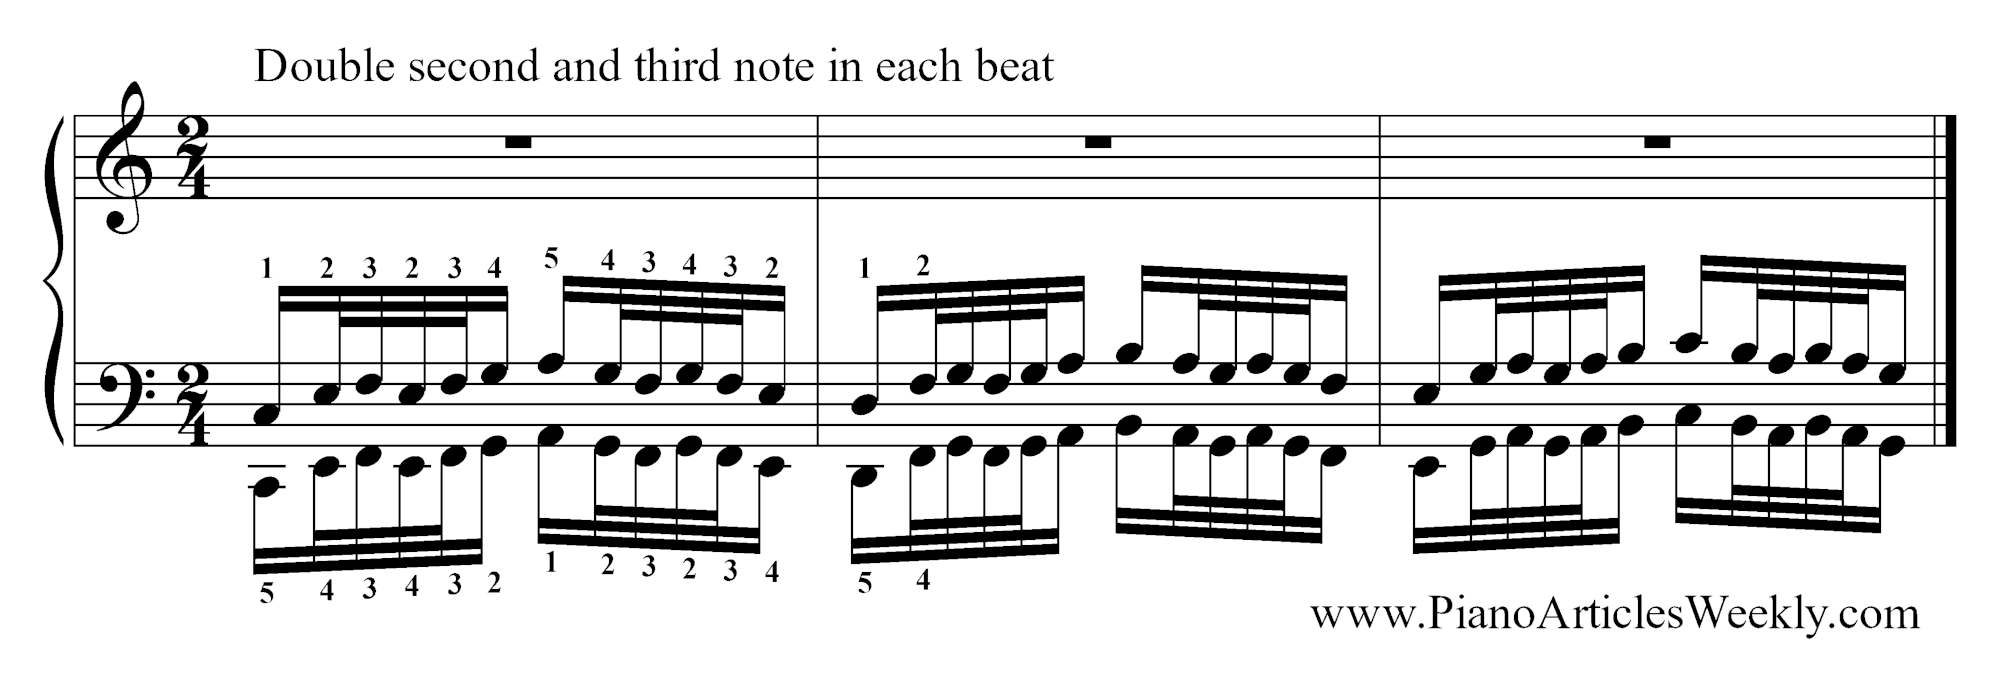 Hanon-Exercise-double-second-and-third-semiquaver_sixteenth-note-in-each-beat